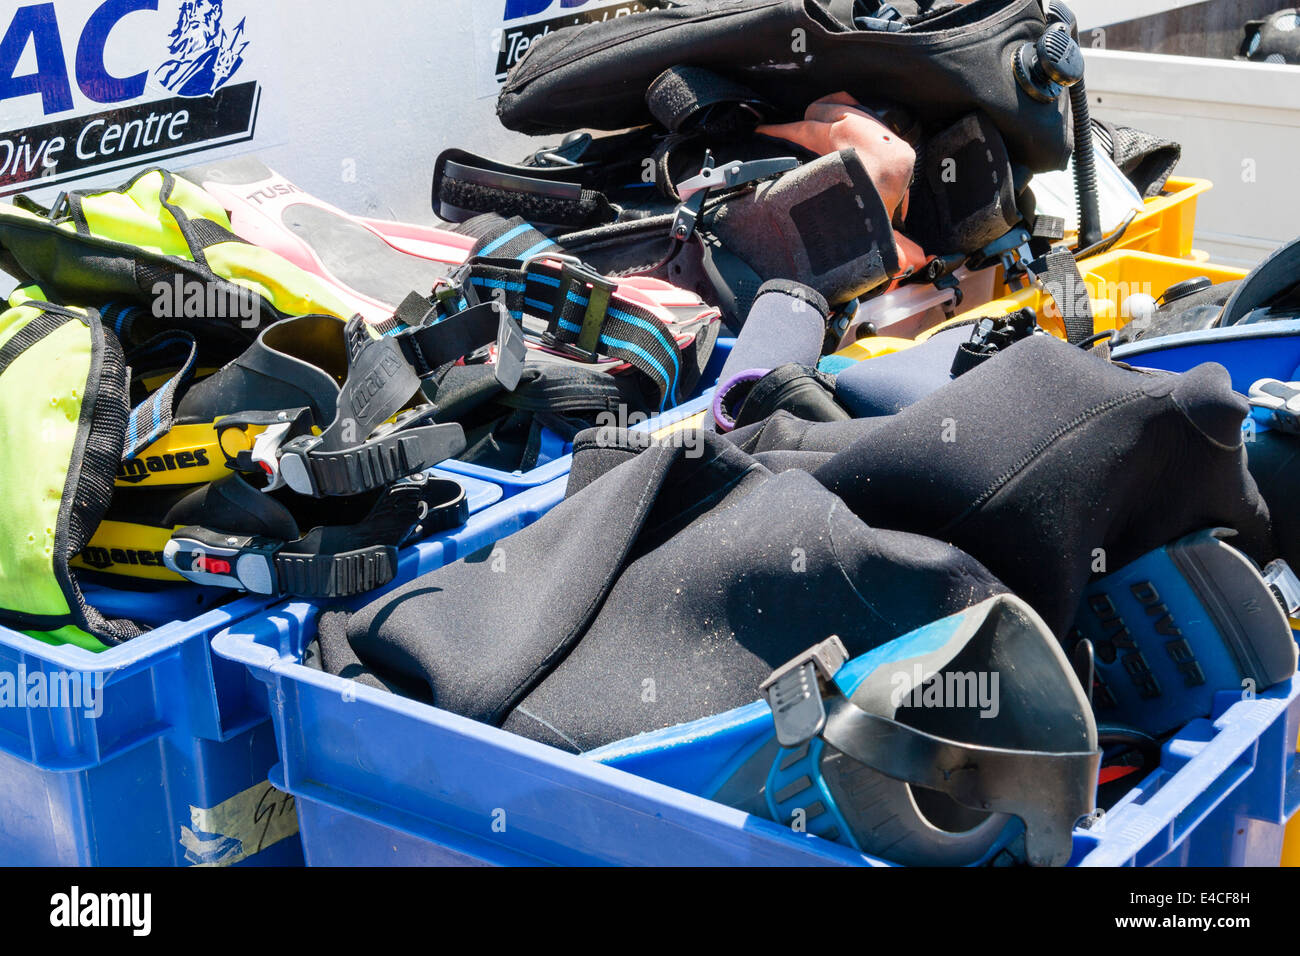 Boxes of scuba diving kit/equipment, fins/wetsuits and bcd, Malta. Stock Photo